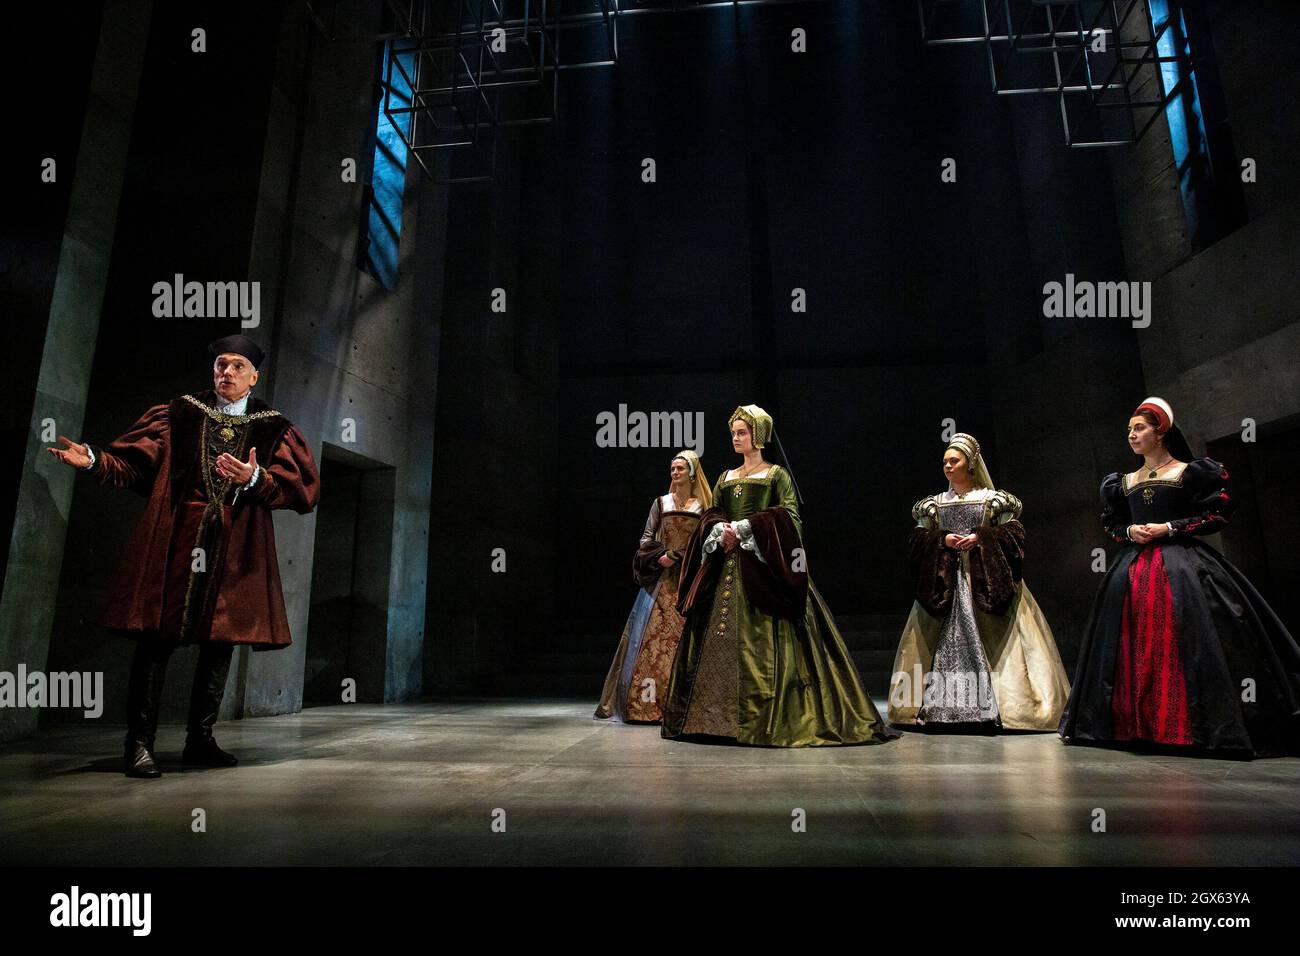 l-r: Ben Miles (Thomas Cromwell), Jo Herbert (Jane, Lady Rochford), Rosanna Adams (Anna), Aurora Dawson-Hunte (Elizabeth Seymour), Olivia Marcus (Katherine Howard) in THE MIRROR AND THE LIGHT at the Gielgud Theatre, London W1  06/10/2021  adapted from her novel by Hilary Mantel & Ben Miles  music: Stephen Warbeck  design: Christopher Oram  lighting: Jessica Hung Han Yun  movement: Emily Jane Boyle  fights: Rachid Sabitri  director: Jeremy Herrin Stock Photo